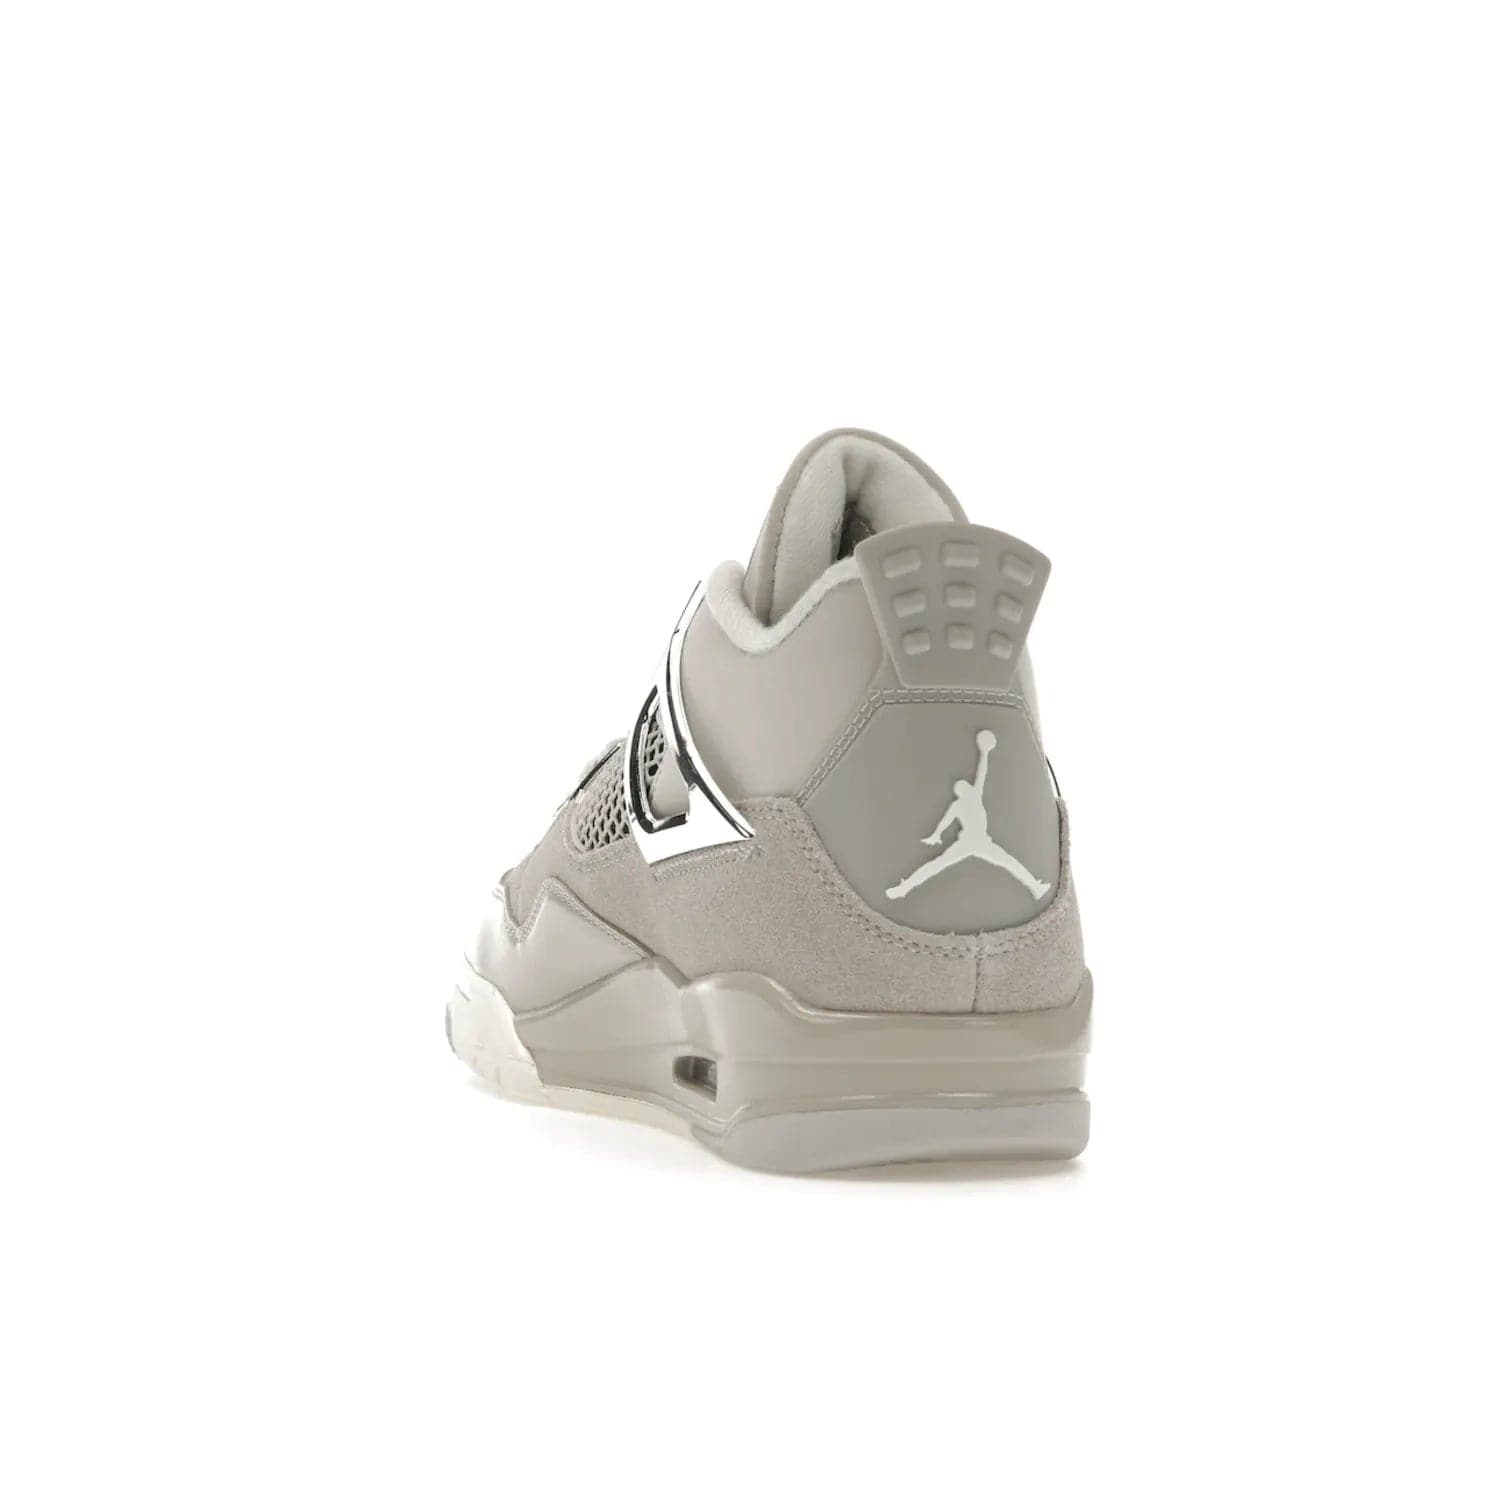 Jordan 4 Retro Frozen Moments (Women's) - Image 26 - Only at www.BallersClubKickz.com - The Jordan 4 Retro Frozen Moments is a stylish blend of classic design elements and modern tones. Featuring suede and leather overlays in a light iron-ore, sail, neutral grey, black, and metallic silver colorway. Get this iconic high-performance sneaker for $210.